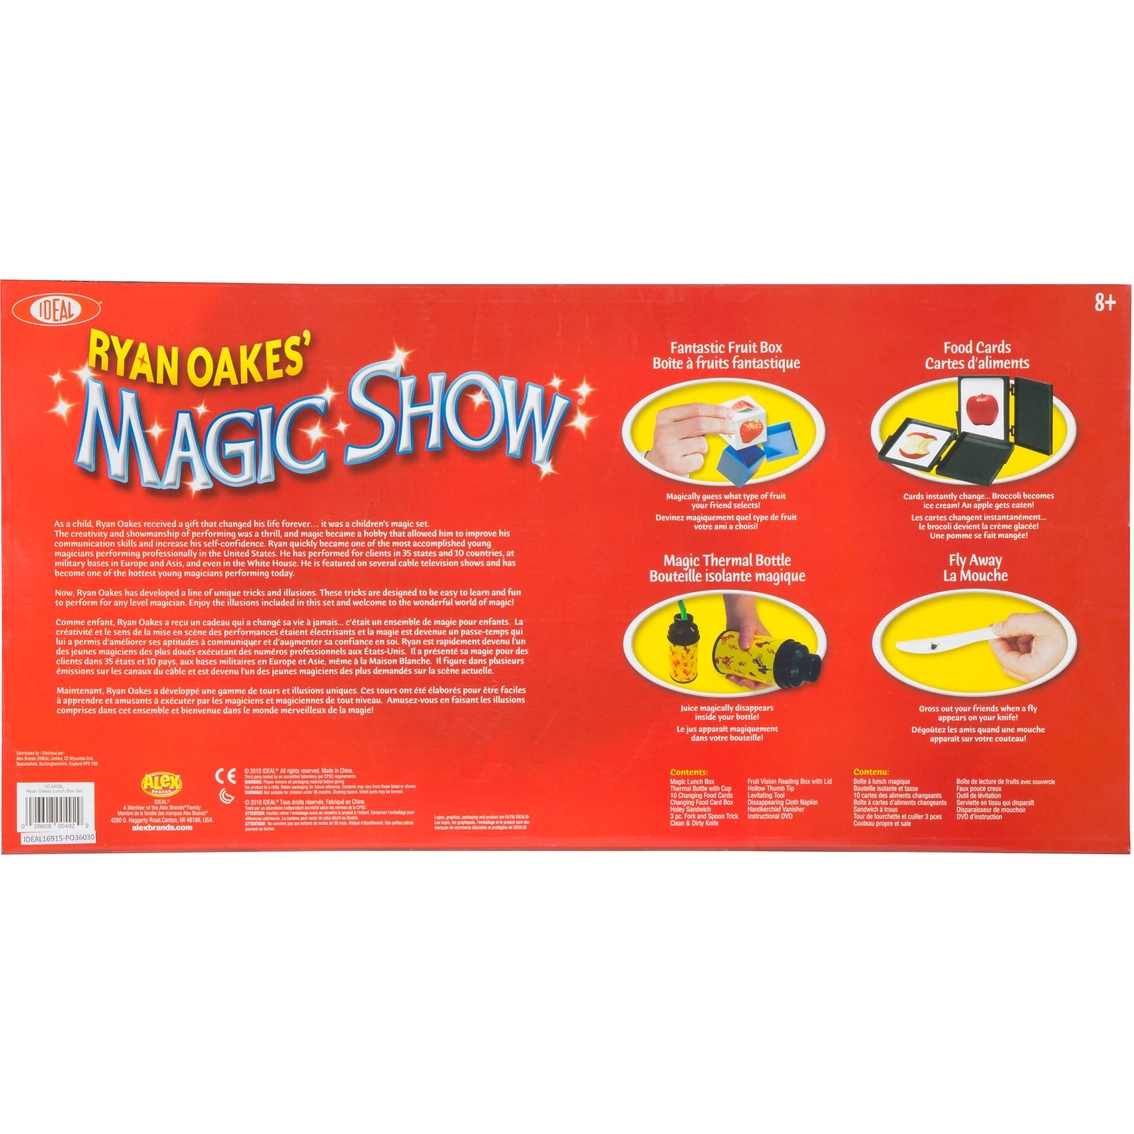 Ideal Ryan Oakes 101 Trick Magic Show with Magic Lunch Box Set & DVD - Image 2 of 3